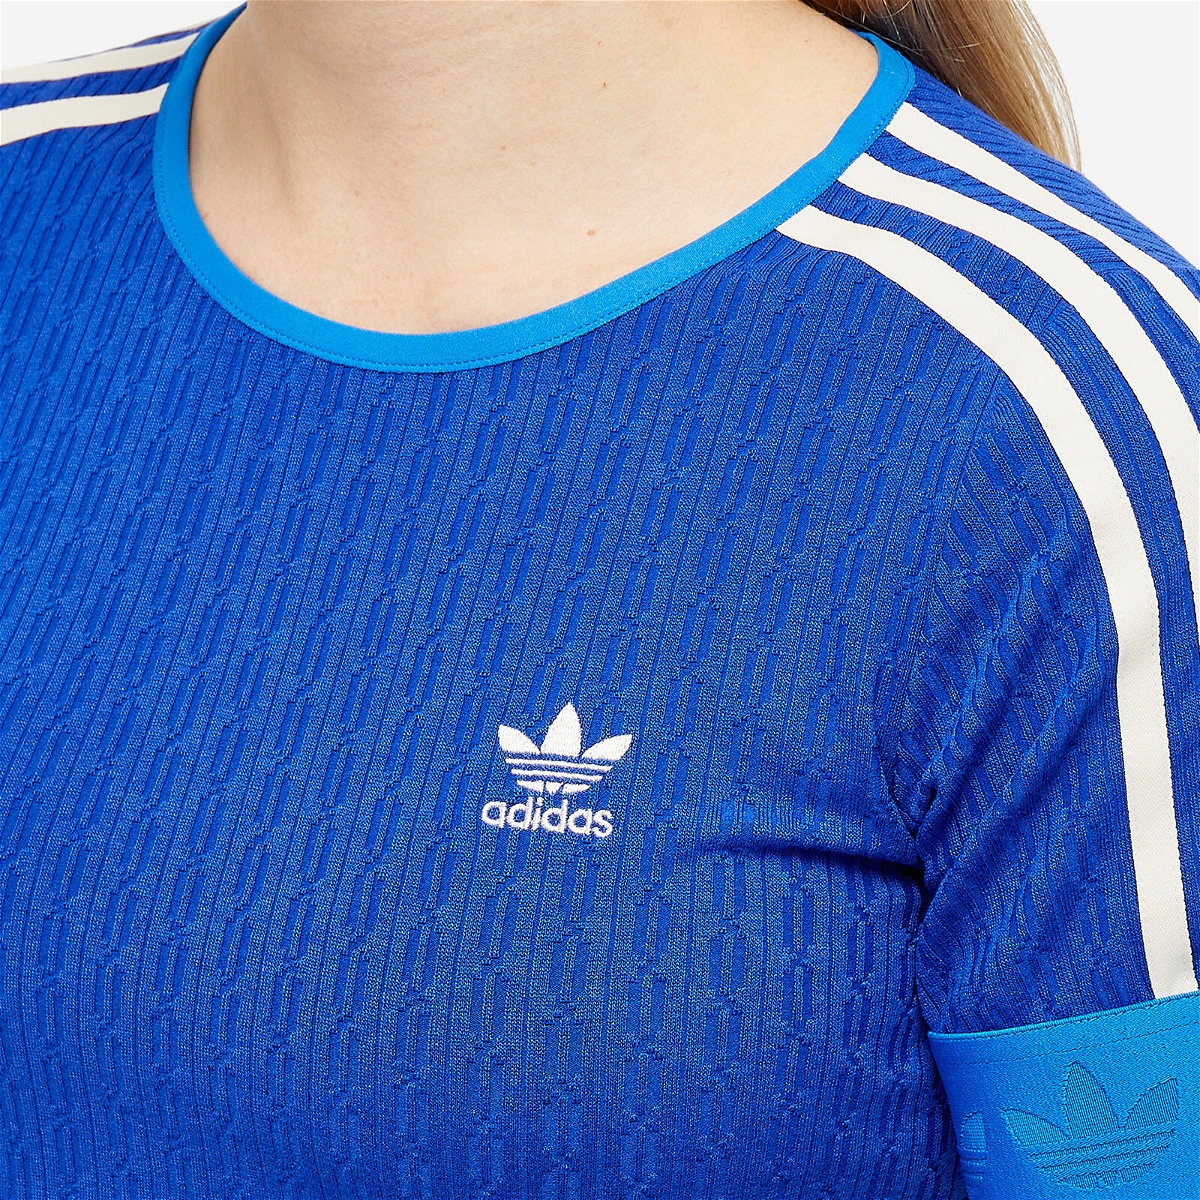 Adidas Women\'s Adicolor Blue in Lucid Semi Knitted adidas T-Shirt